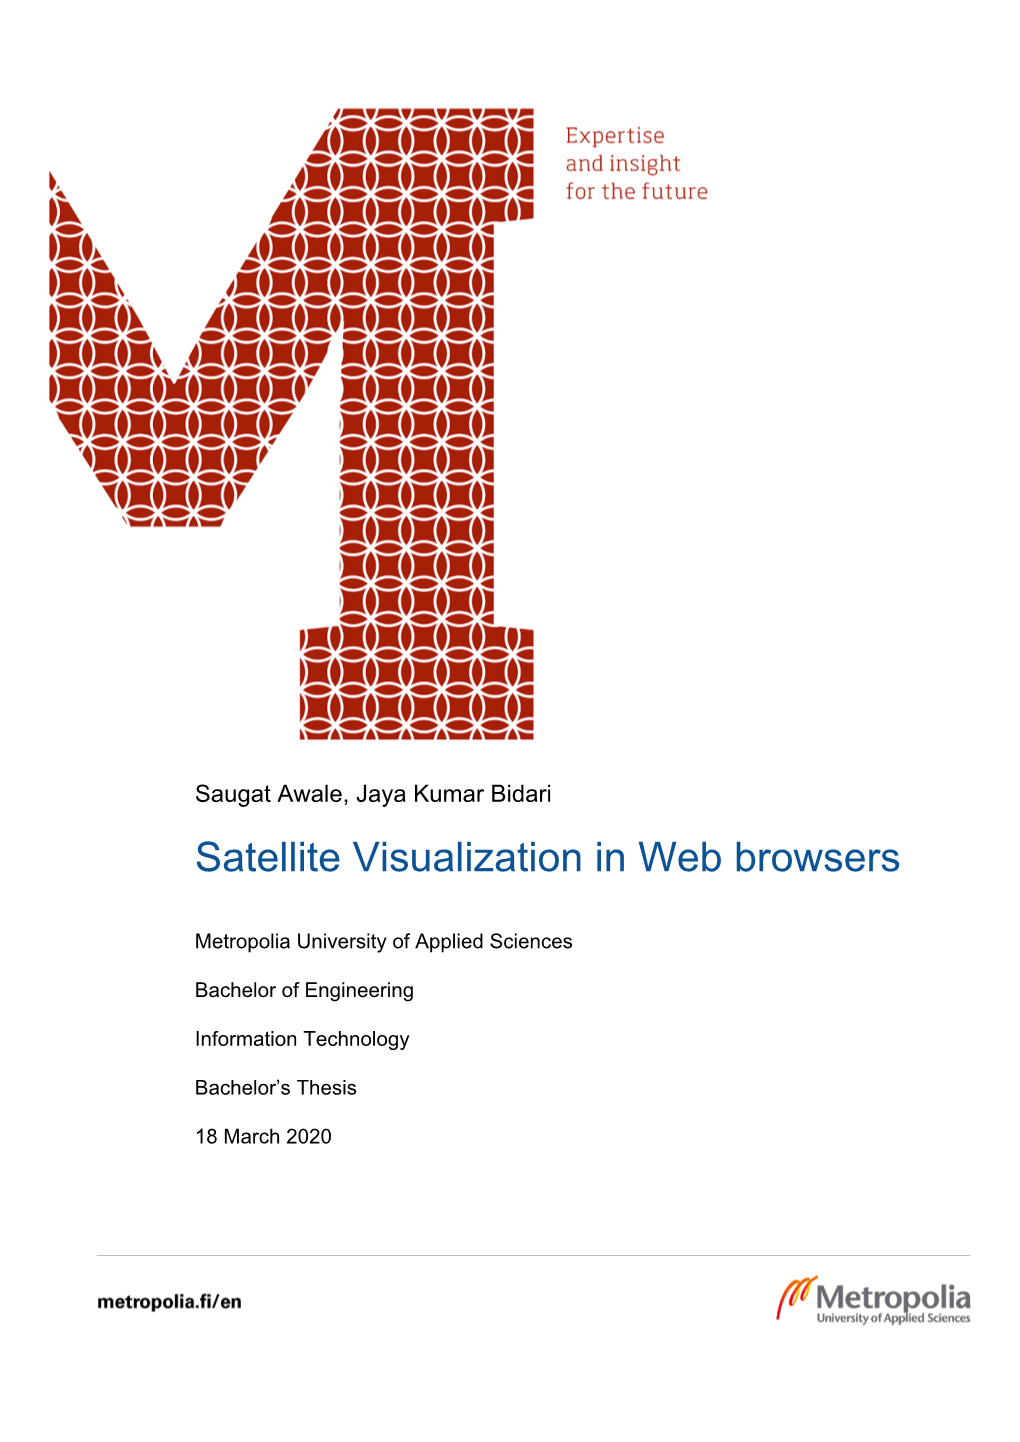 Satellite Visualization in Web Browsers